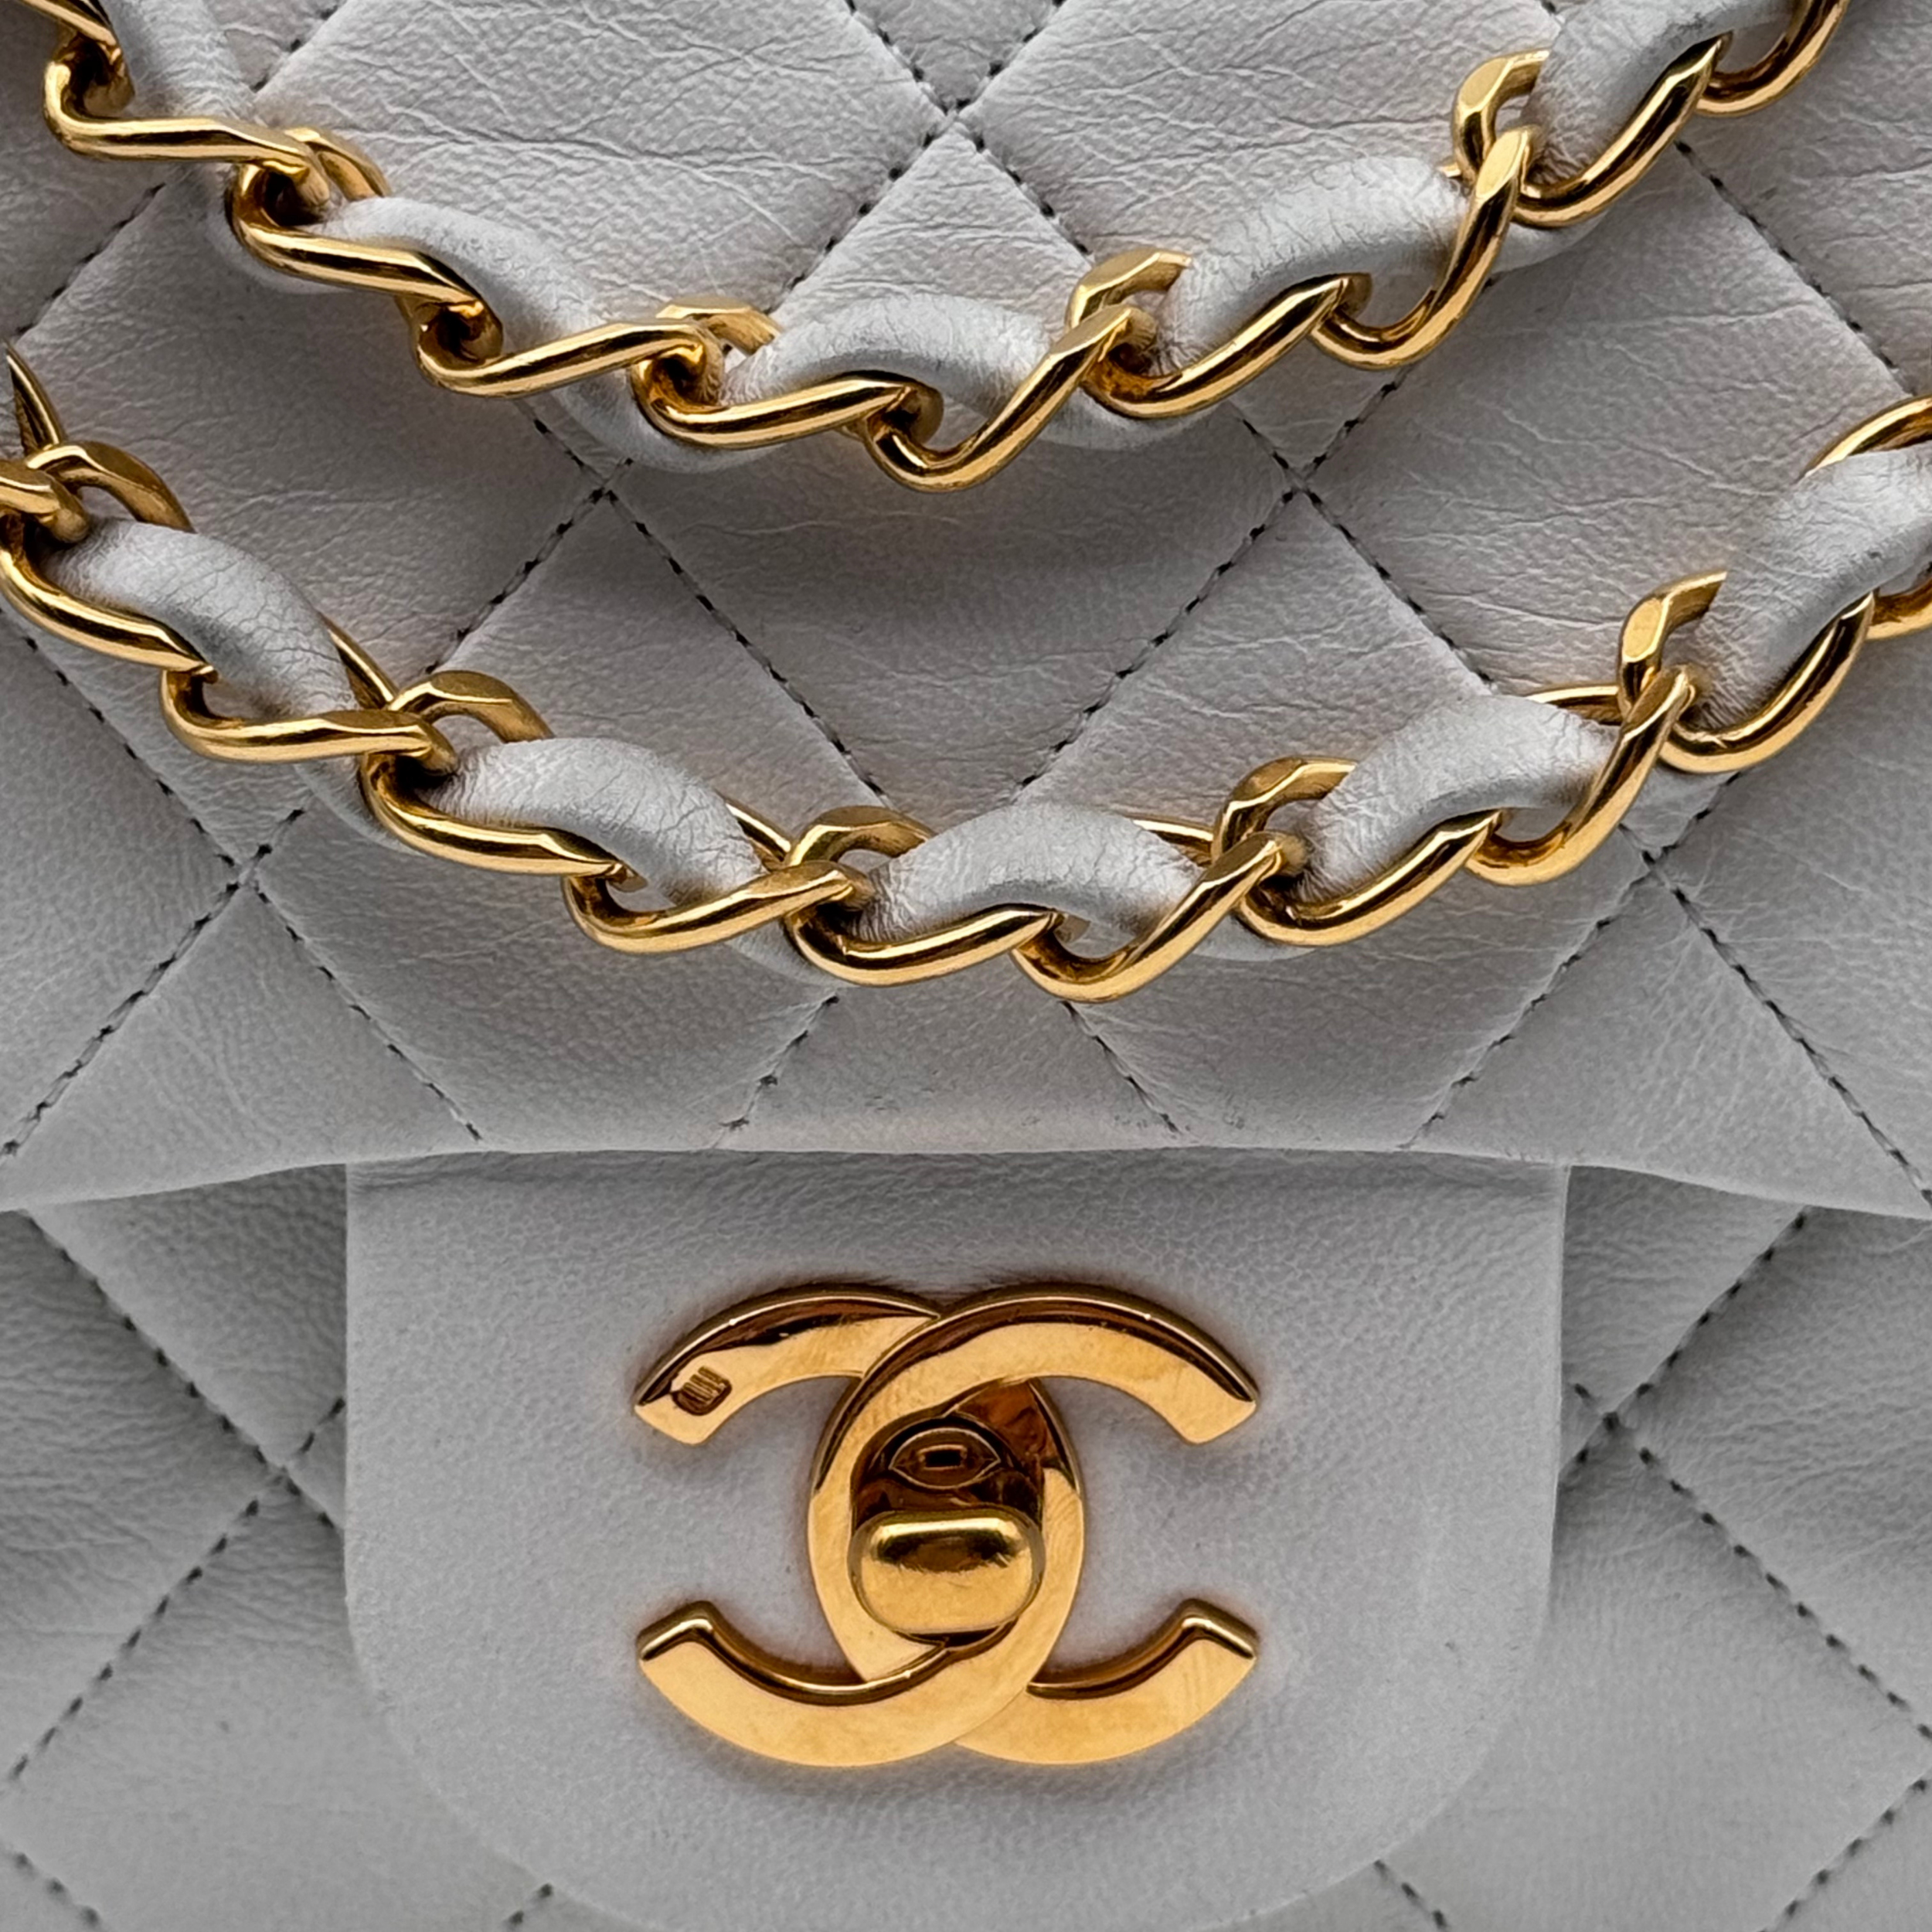 CLASSIC TIMELESS SMALL DOUBLE FLAP - CHANEL Lola Collective